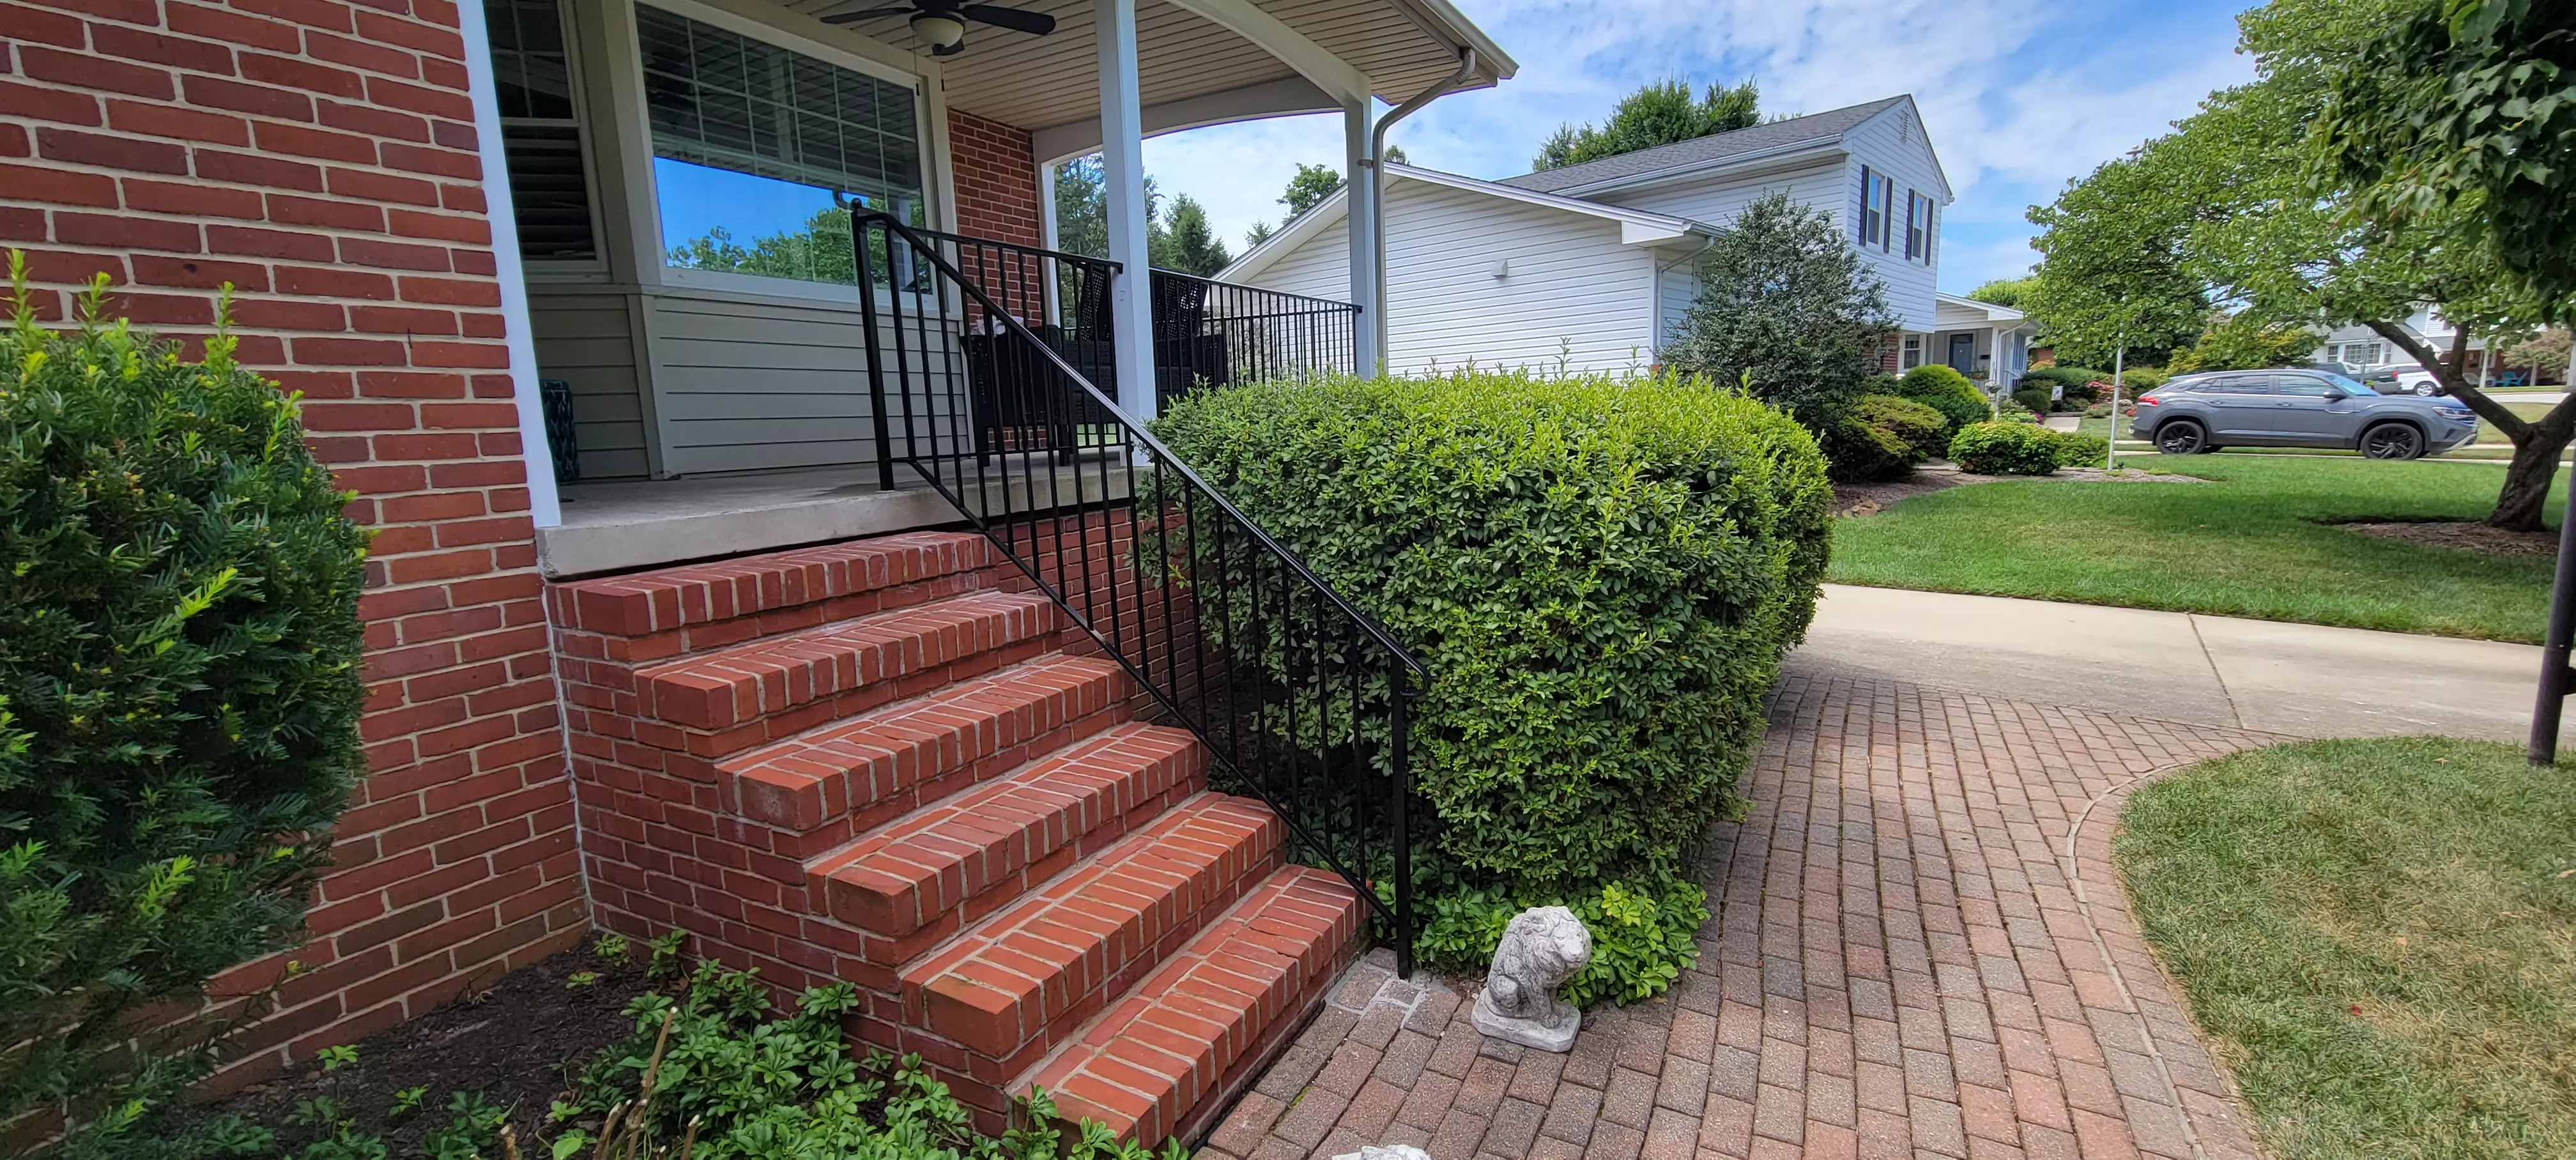 Photo of black residential railing on a brick outdoor patio and staircase